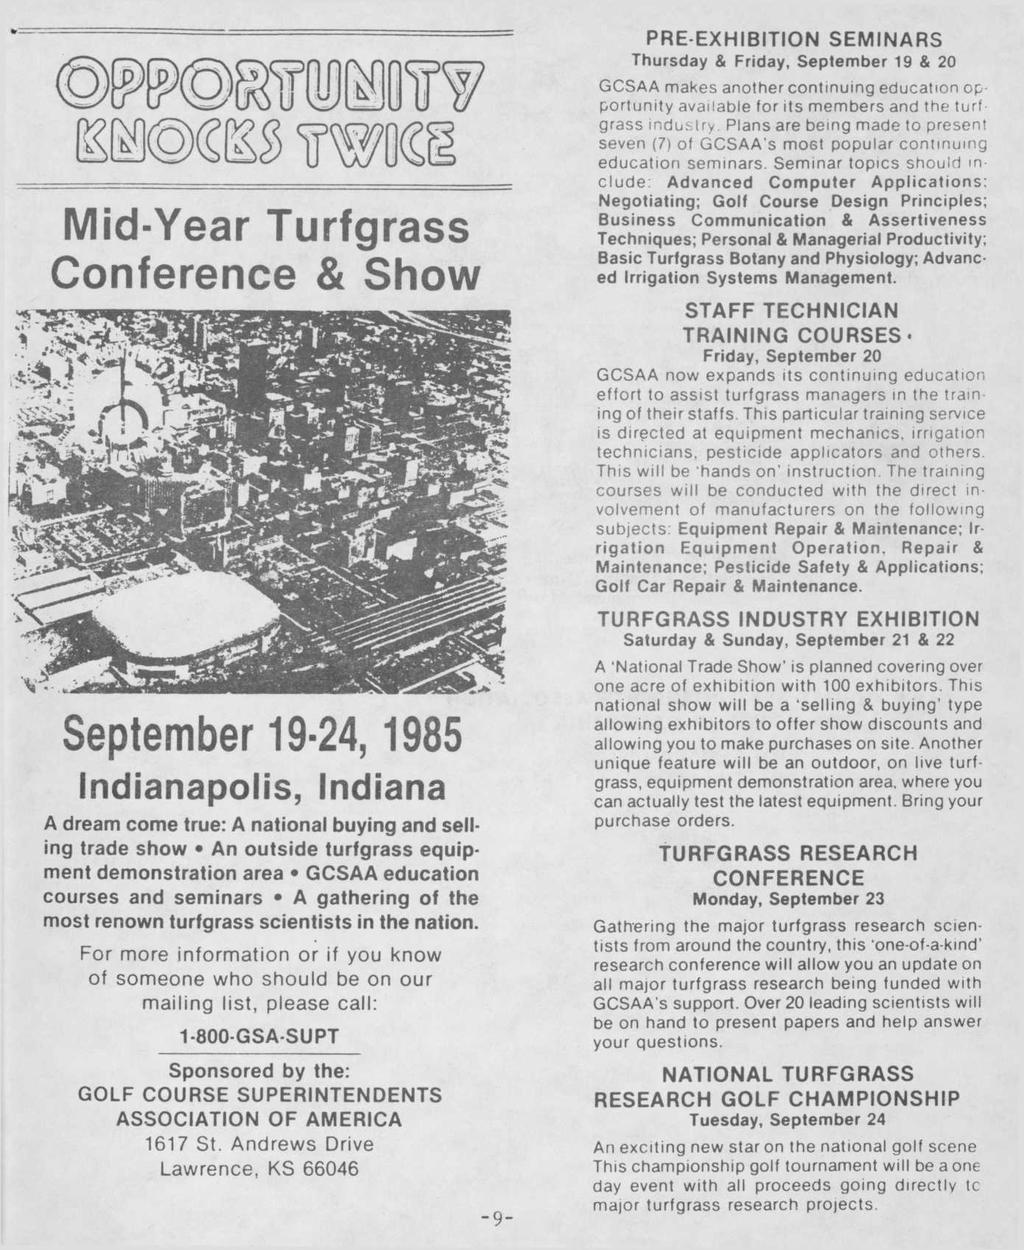 Mid-Year Turfgrass Conference & Show September 19-24,1985 Indianapolis, Indiana A dream come true: A national buying and selling trade show An outside turfgrass equipment demonstration area GCSAA